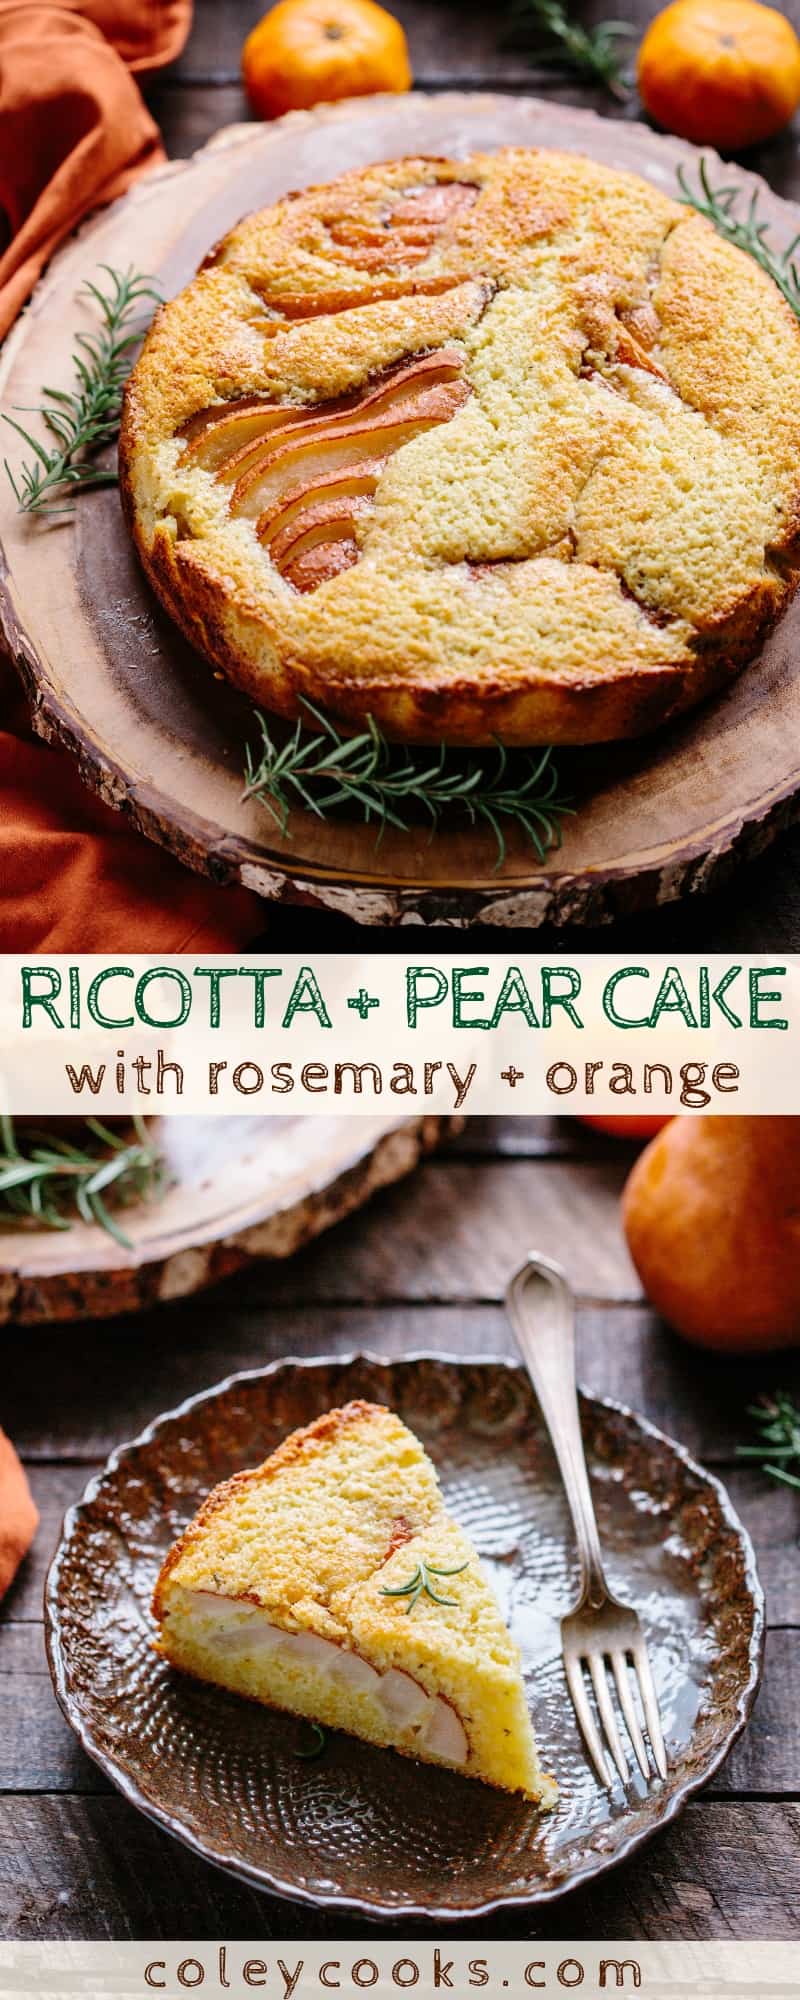 Ricotta + Pear Cake | This beautiful fall cake is made with fresh ricotta and pears, scented with orange and rosemary and makes a perfect Thanksgiving dessert! #thanksgiving #recipe #pear #ricotta #cake #dessert #rosemary #orange #easy | ColeyCooks.com